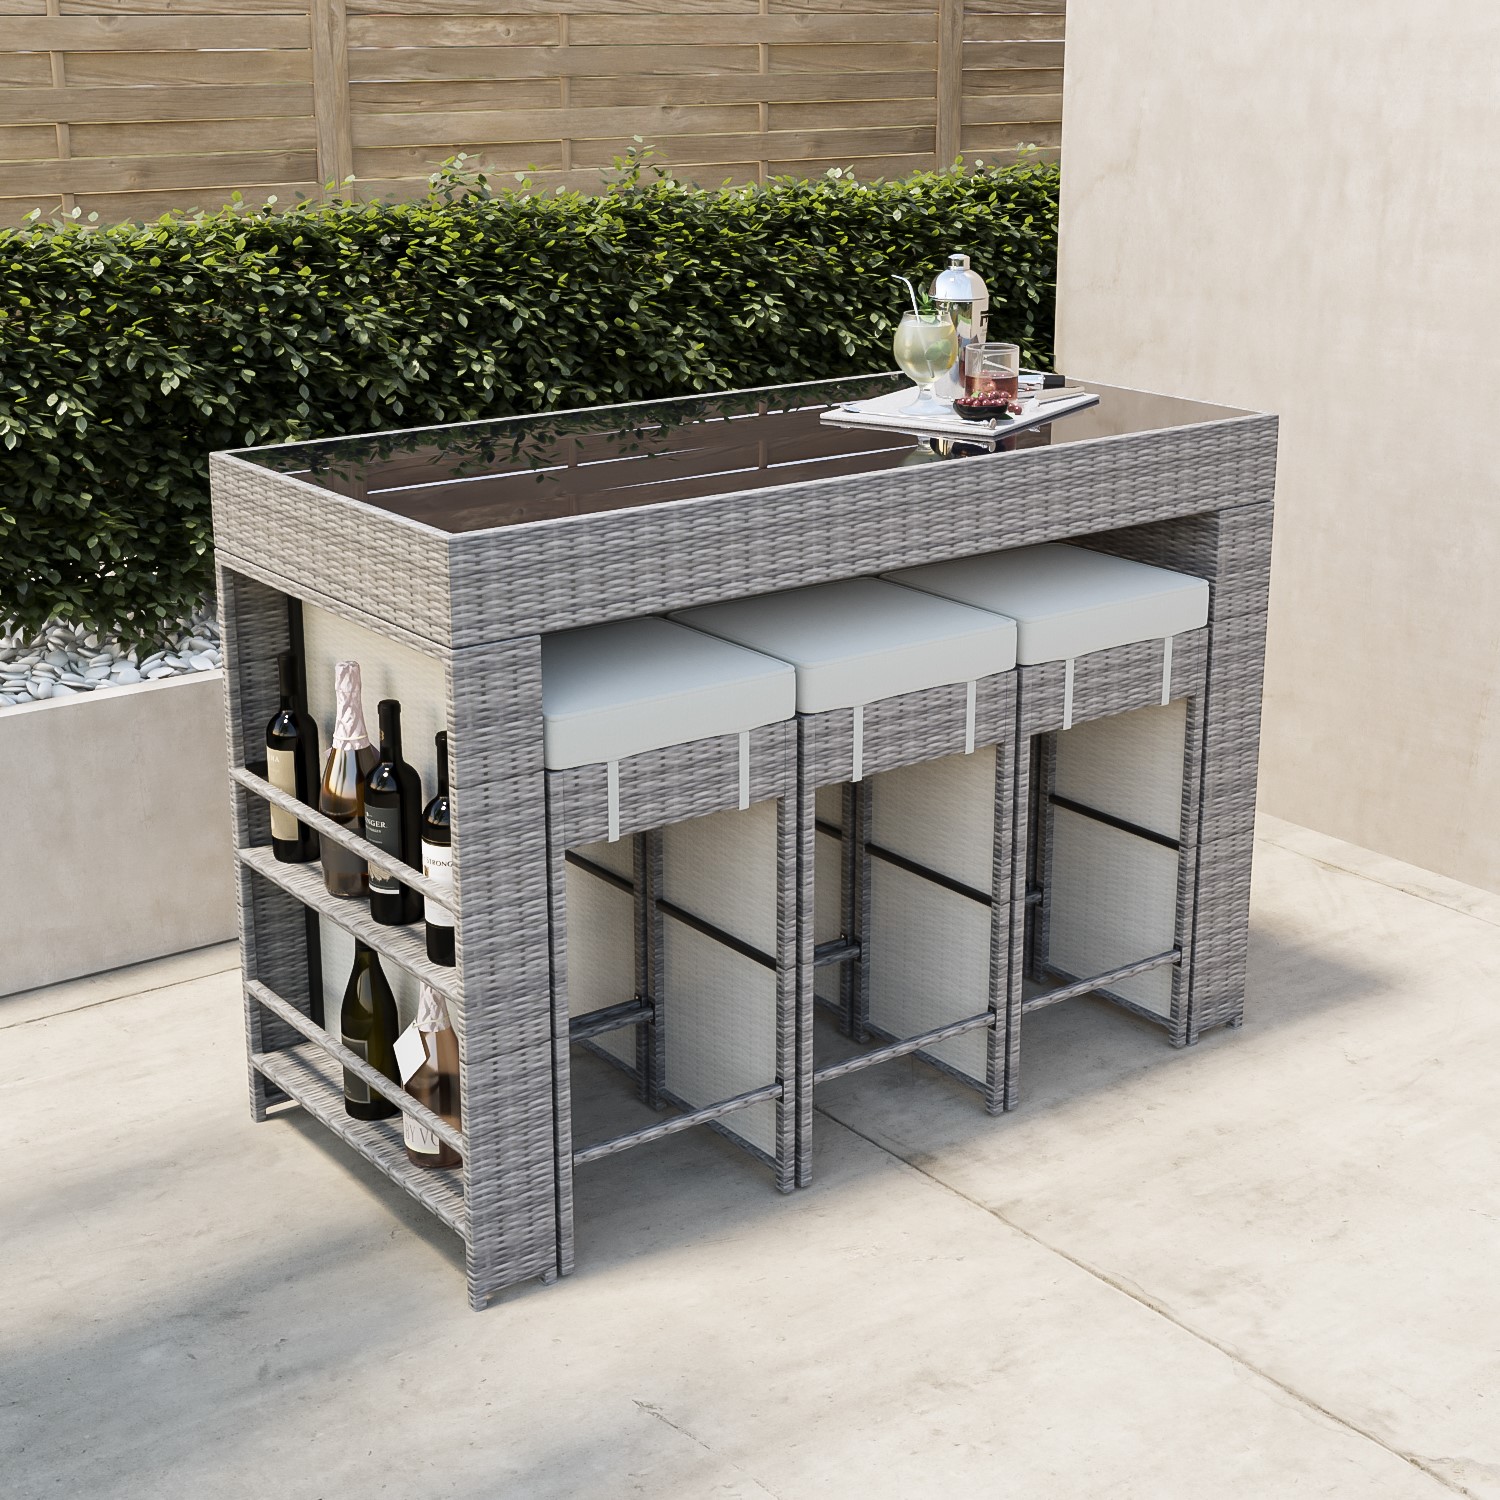 Read more about 6 seater garden bar cube set in natural rattan fortrose